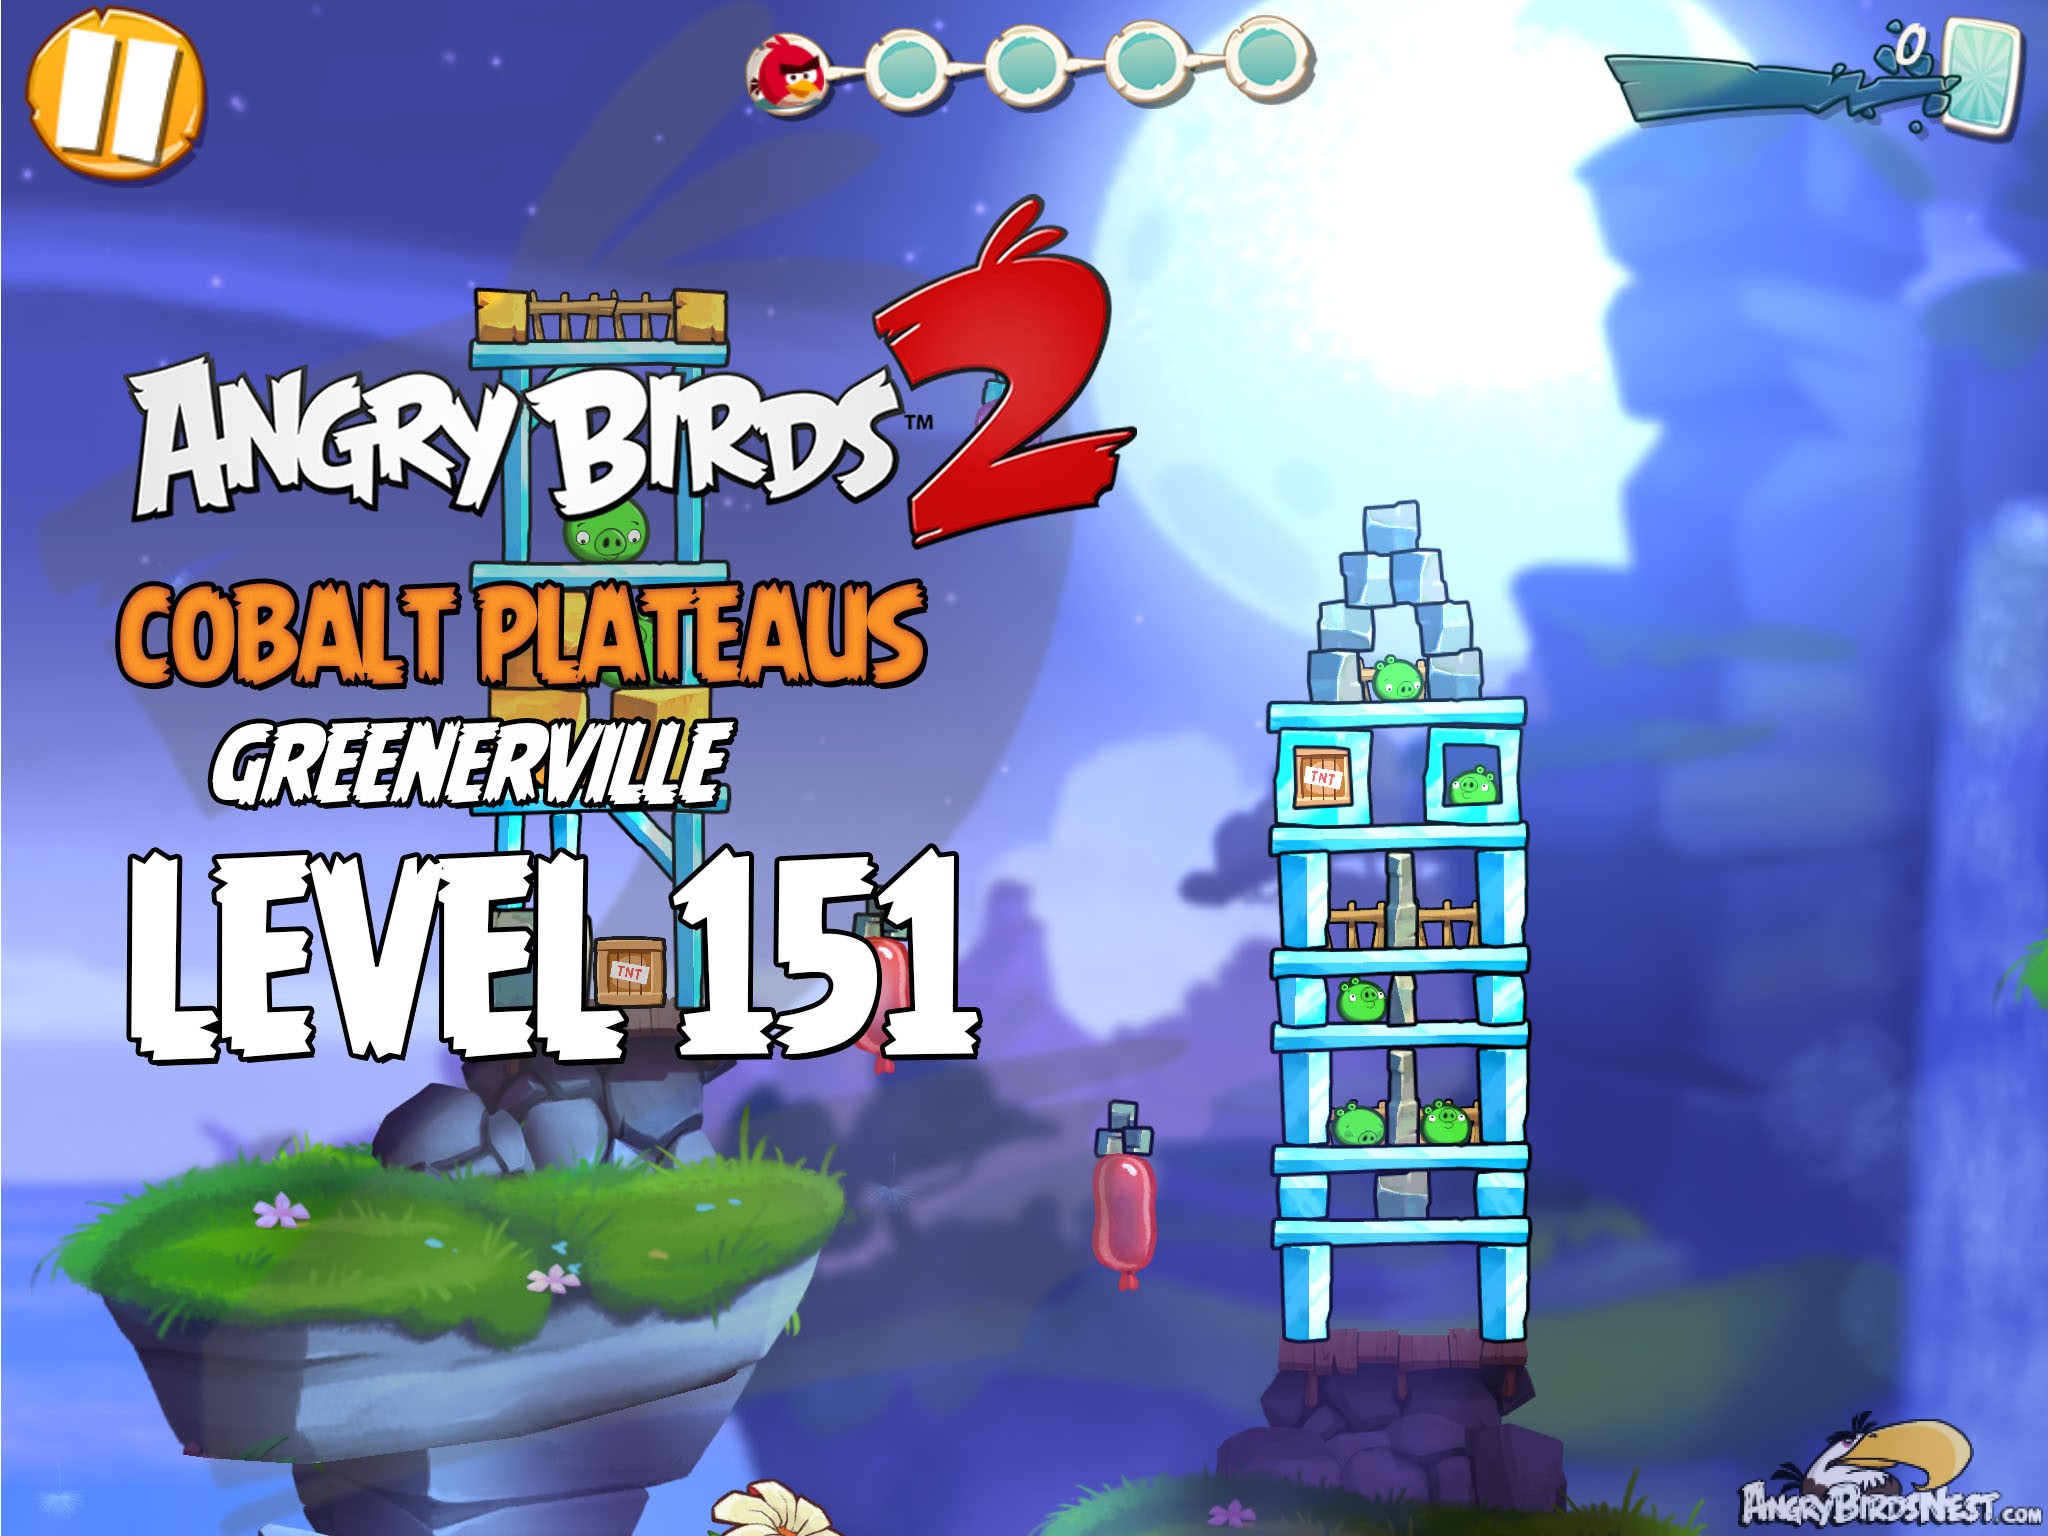 Angry Birds 2 Cobalt Plateaus Greenerville Level 151